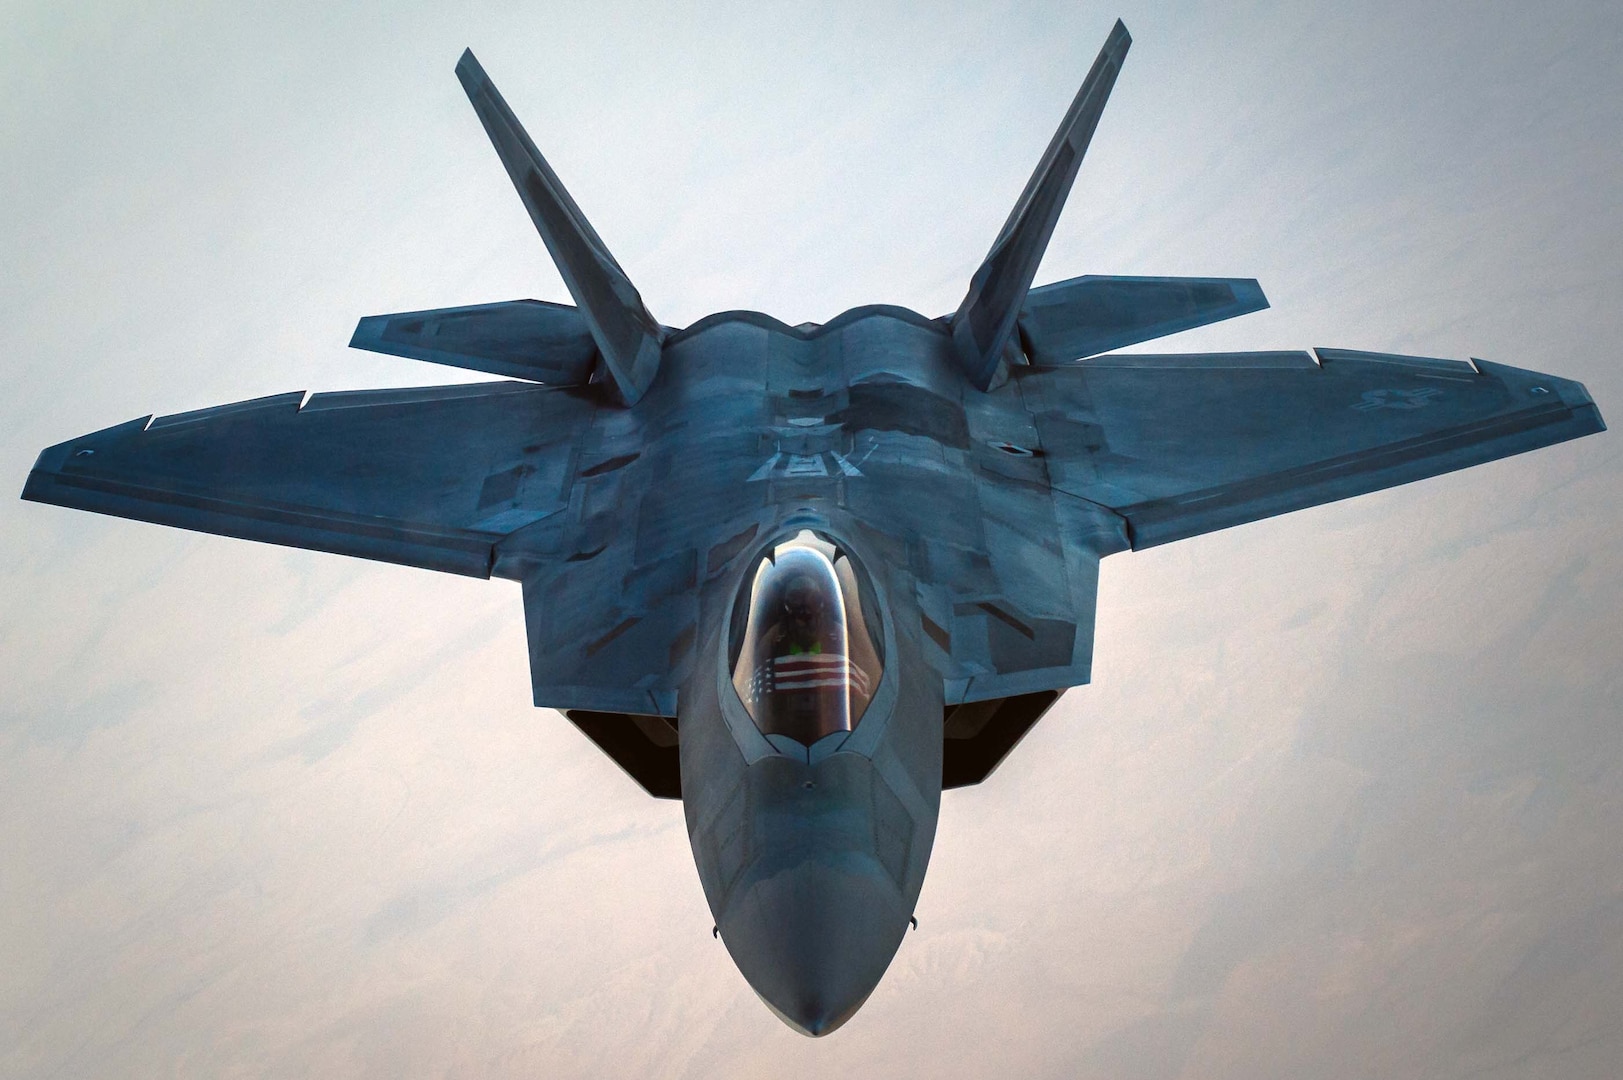 A U.S. Air Force F-22 Raptor separates from a KC-10 Extender after refueling over an undisclosed location in Southwest Asia, Oct. 26, 2016. The F-22s are providing strategic close air support with several other Coalition airframes working to liberate the city of Mosul, Iraq and have also performed approximately half (51%) of all escort missions in Operation Inherent Resolve. (U.S. Air Force photo by Senior Airman Tyler Woodward)